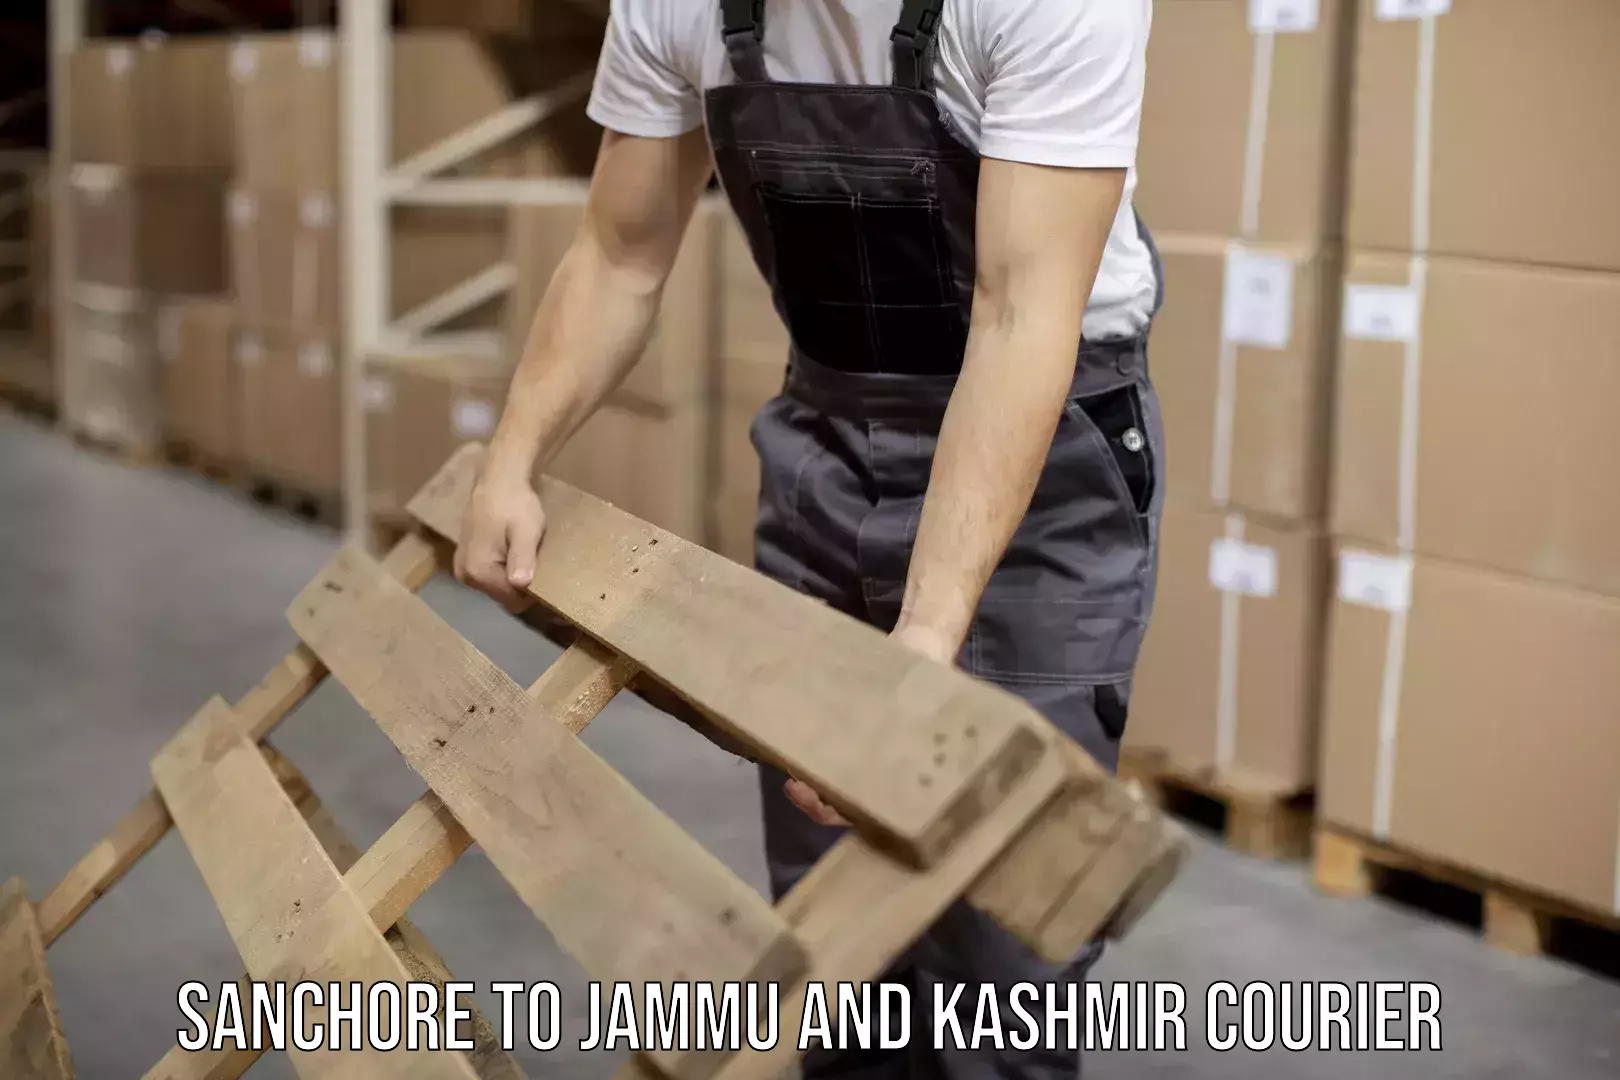 Subscription-based courier Sanchore to Jammu and Kashmir